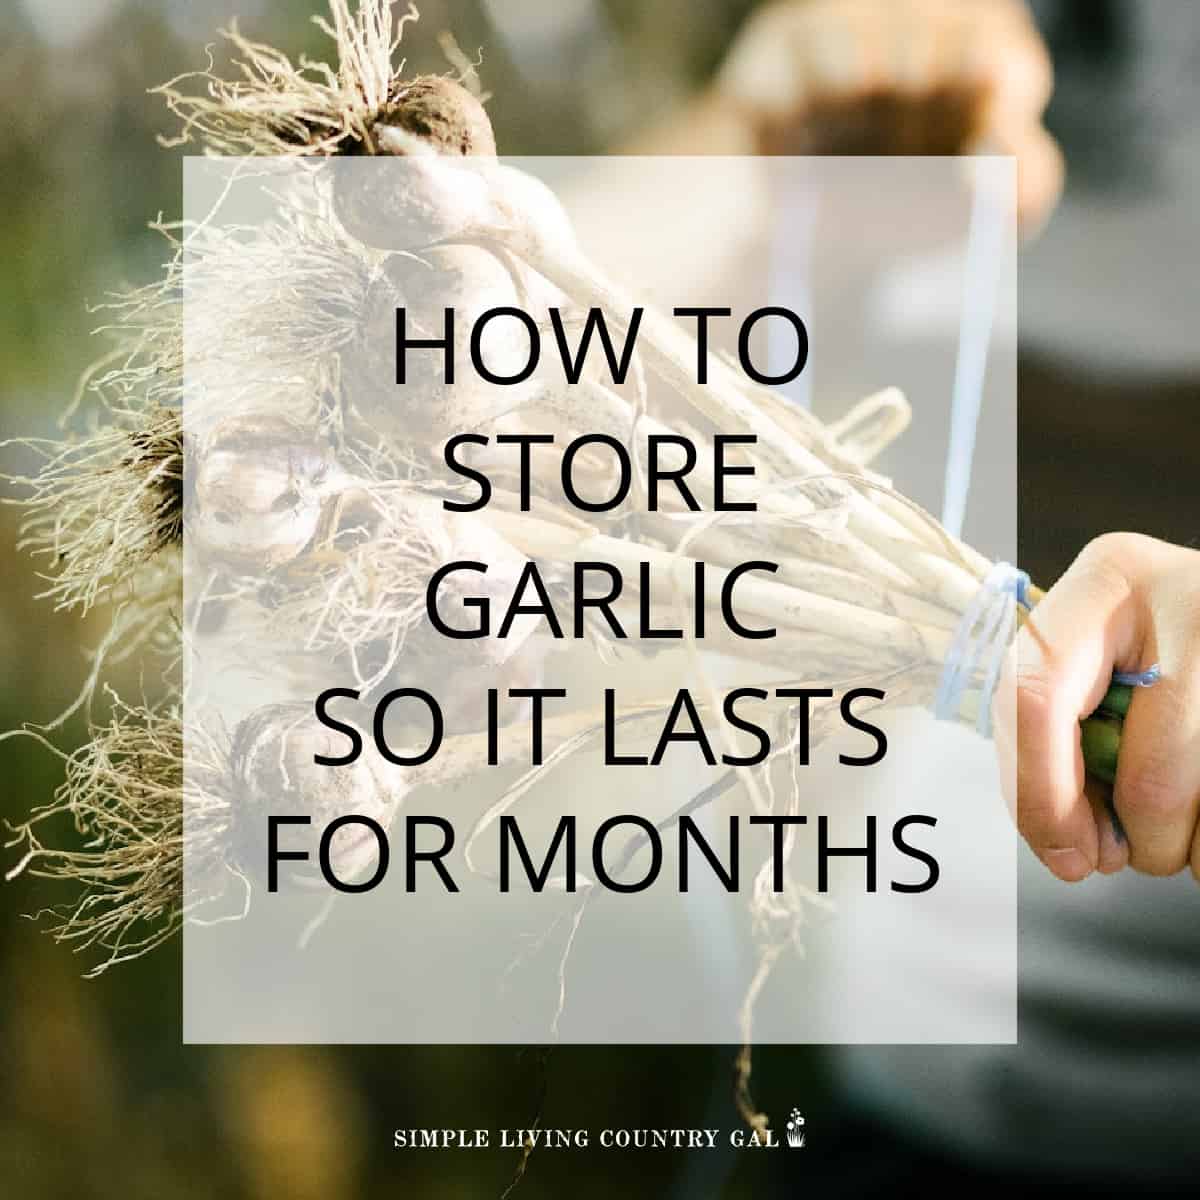 HOW TO STORE GARLIC